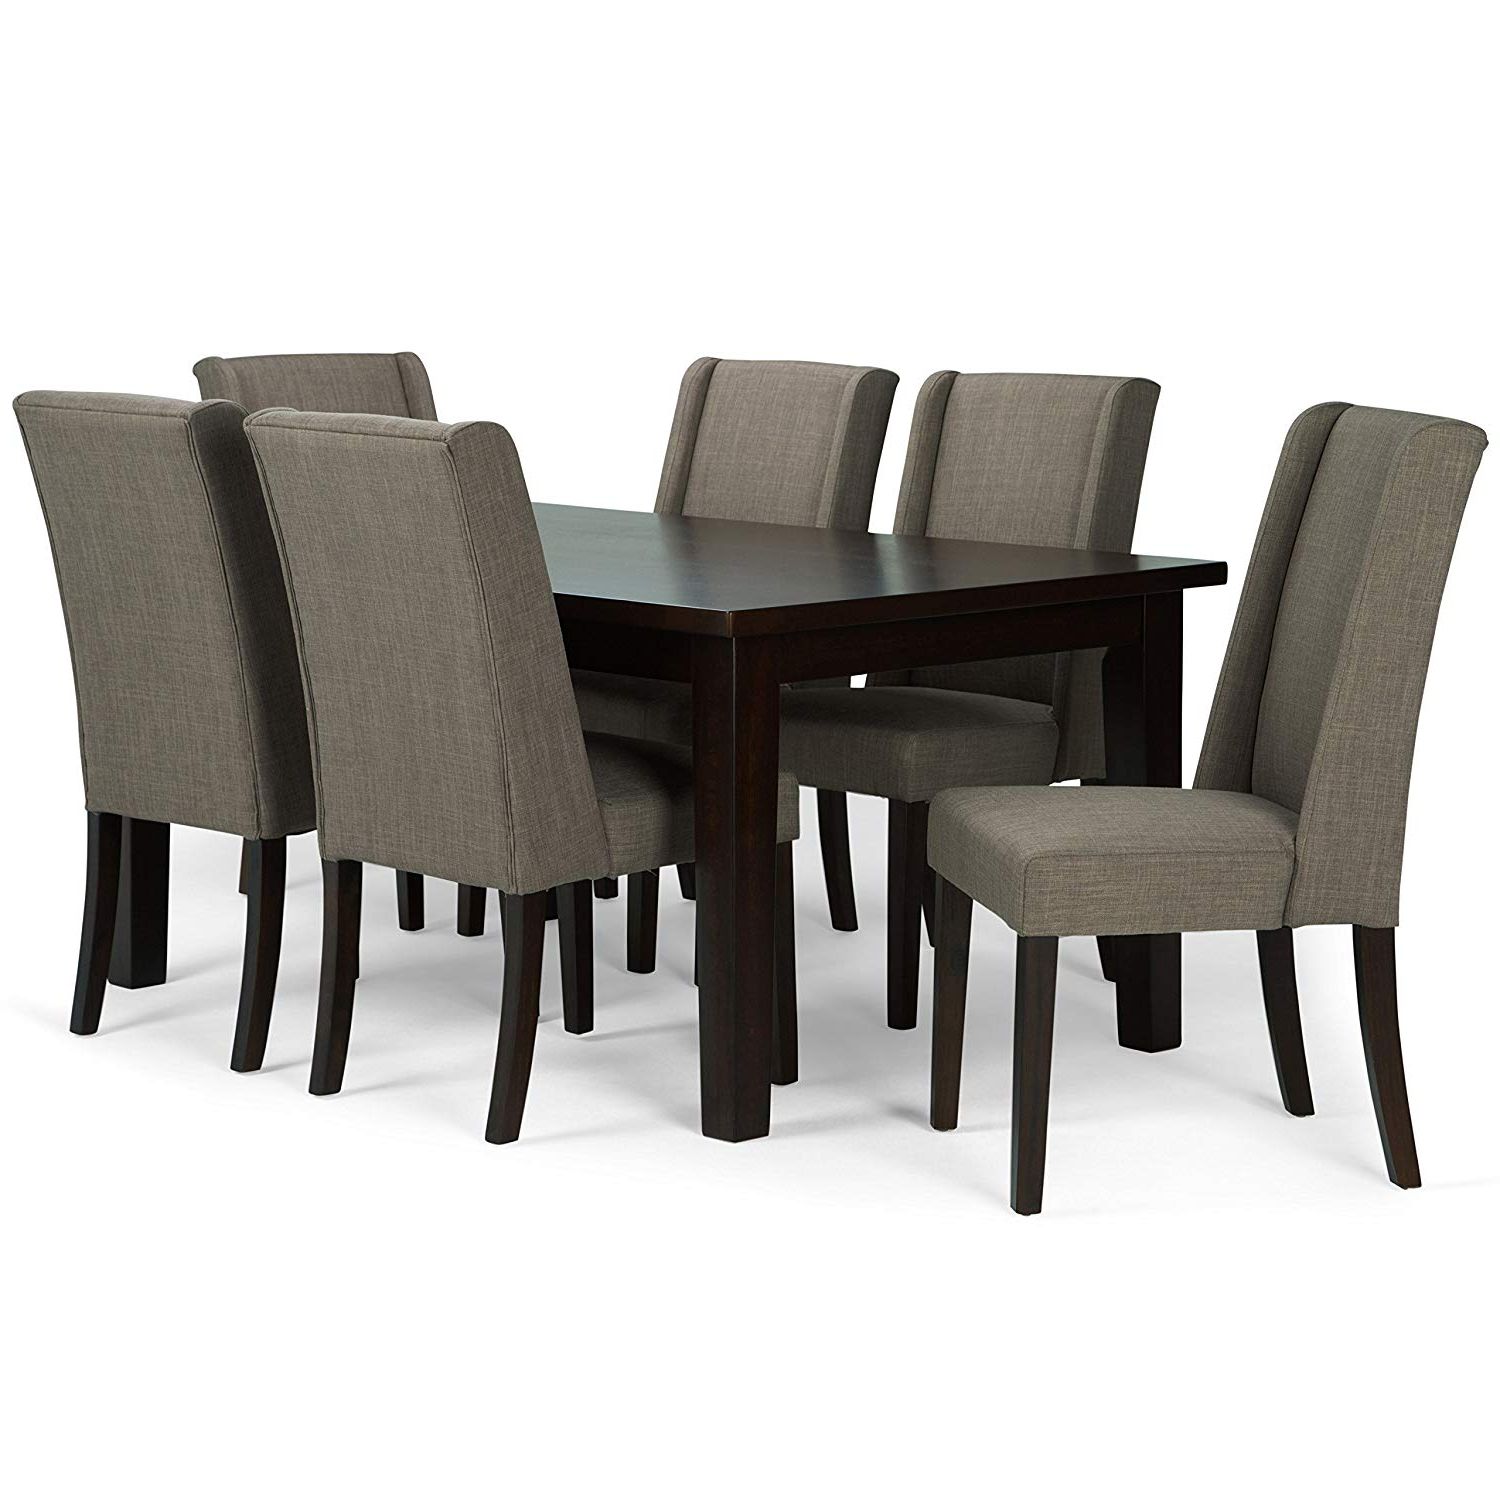 Simpli Home Axcds7sb Lml Sotherby Contemporary 7 Piece Dining Set With 6  Upholstered Dining Chairs In Light Mocha Linen Look Fabric And 66 Inch Wide For Most Recent Contemporary 6 Seating Rectangular Dining Tables (View 1 of 25)